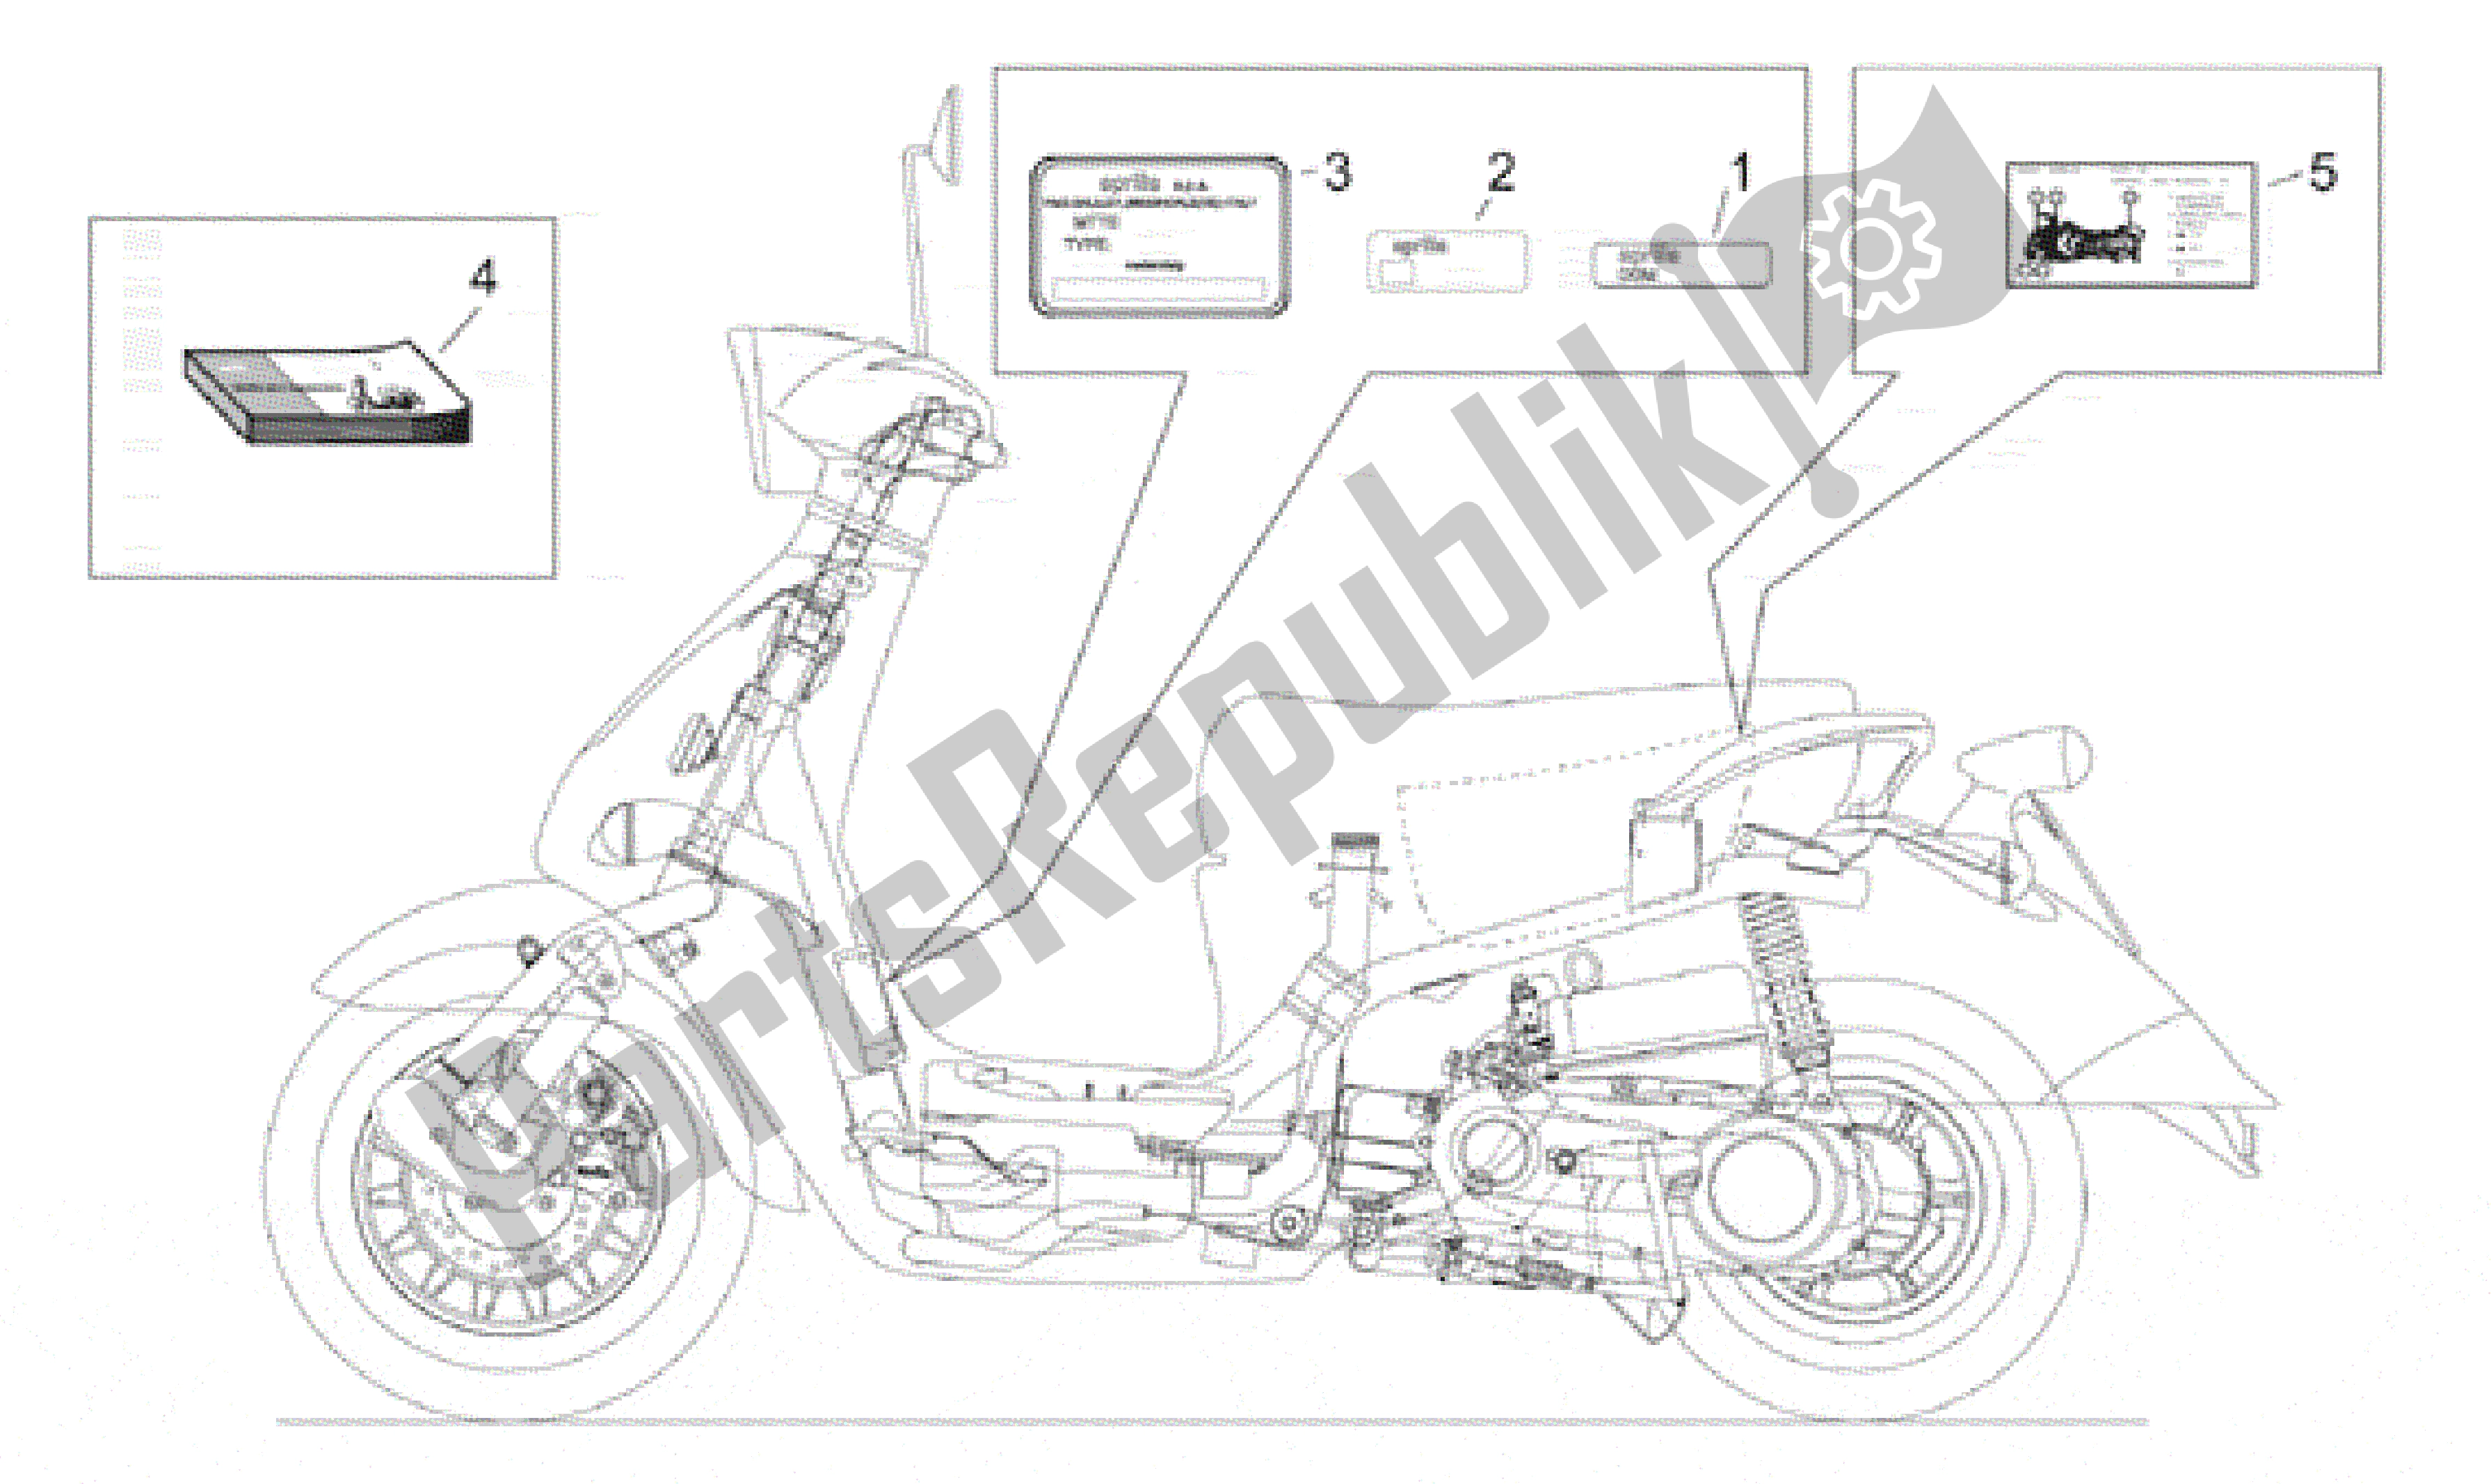 All parts for the Plate Set And Handbook of the Aprilia Habana 50 1999 - 2001